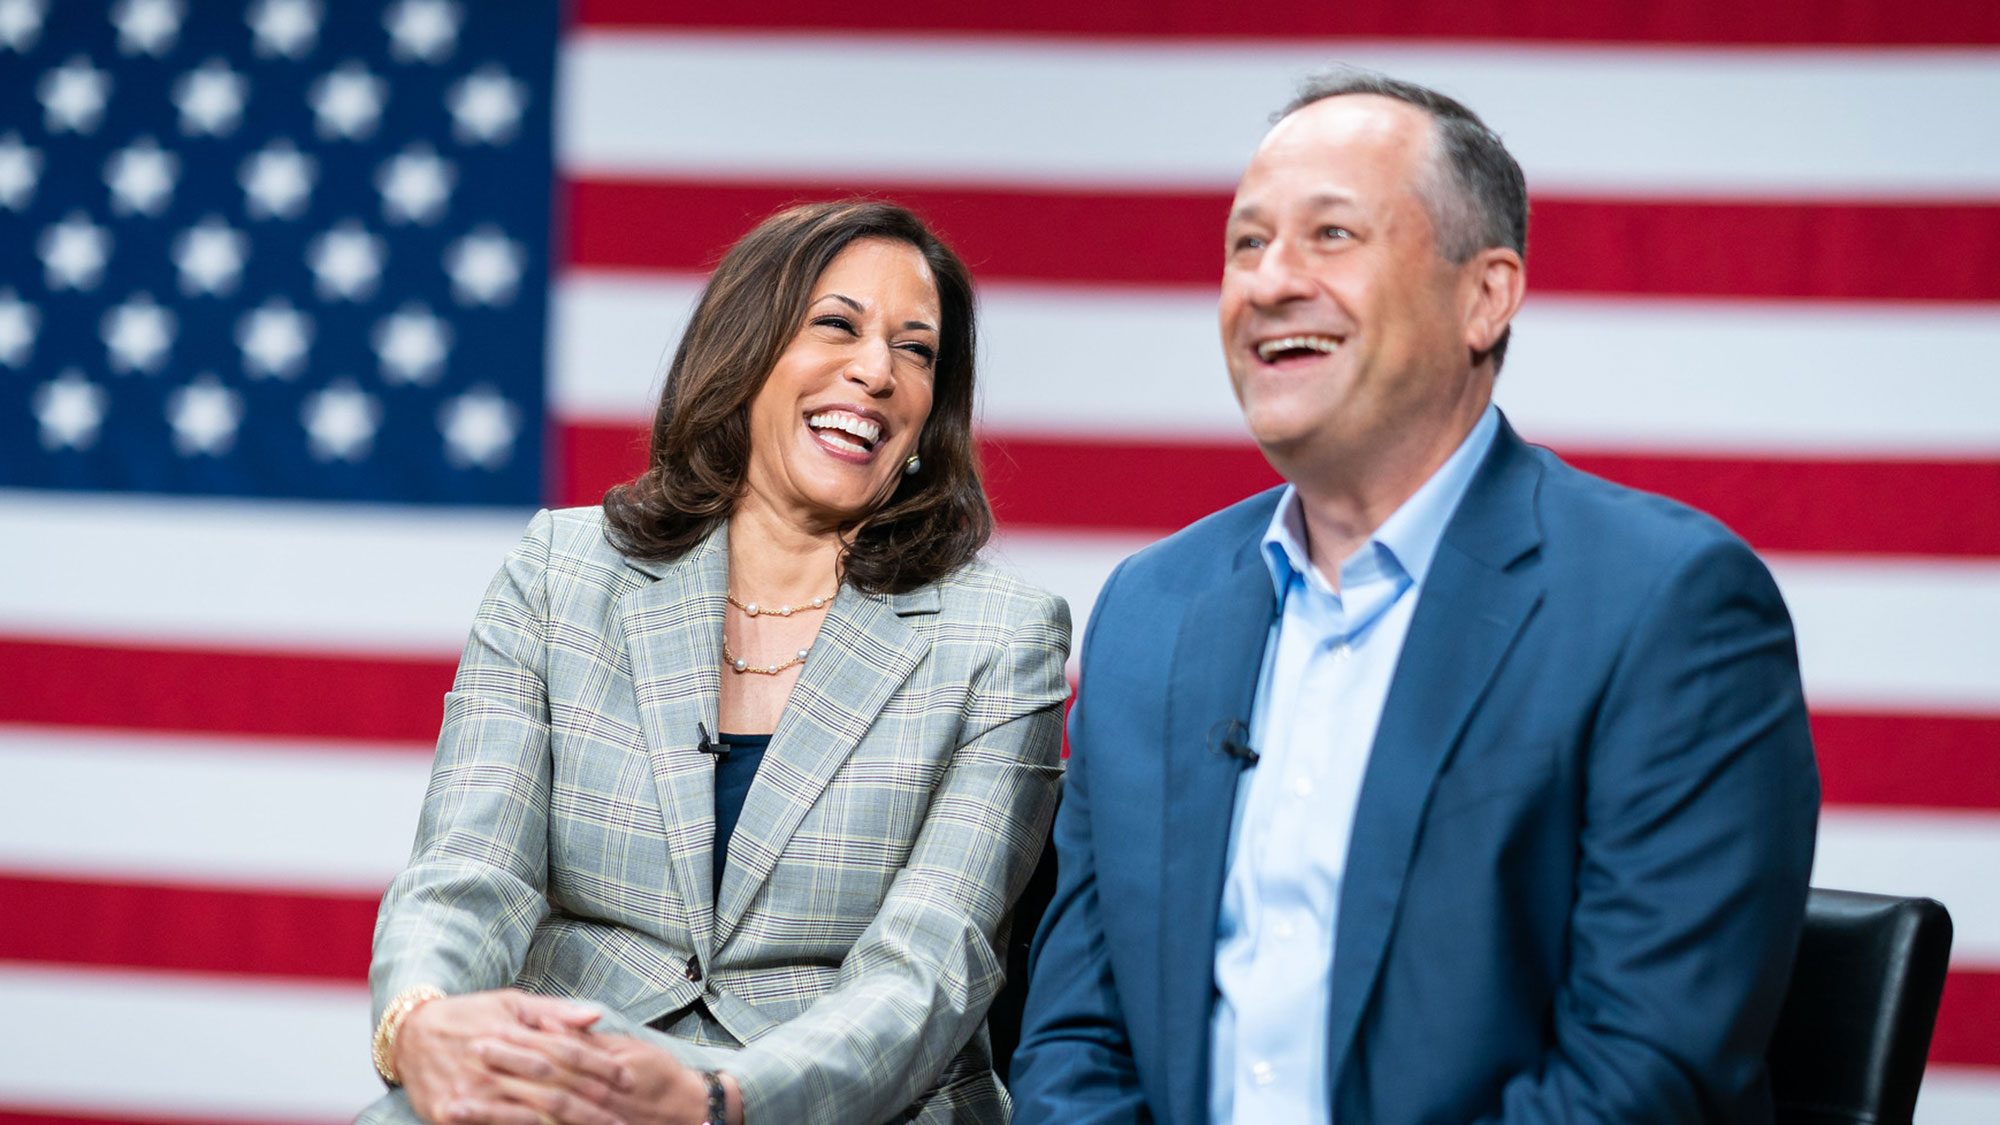 Kamala Harris and Douglas Emhoff share a laugh with the American flag in the background.